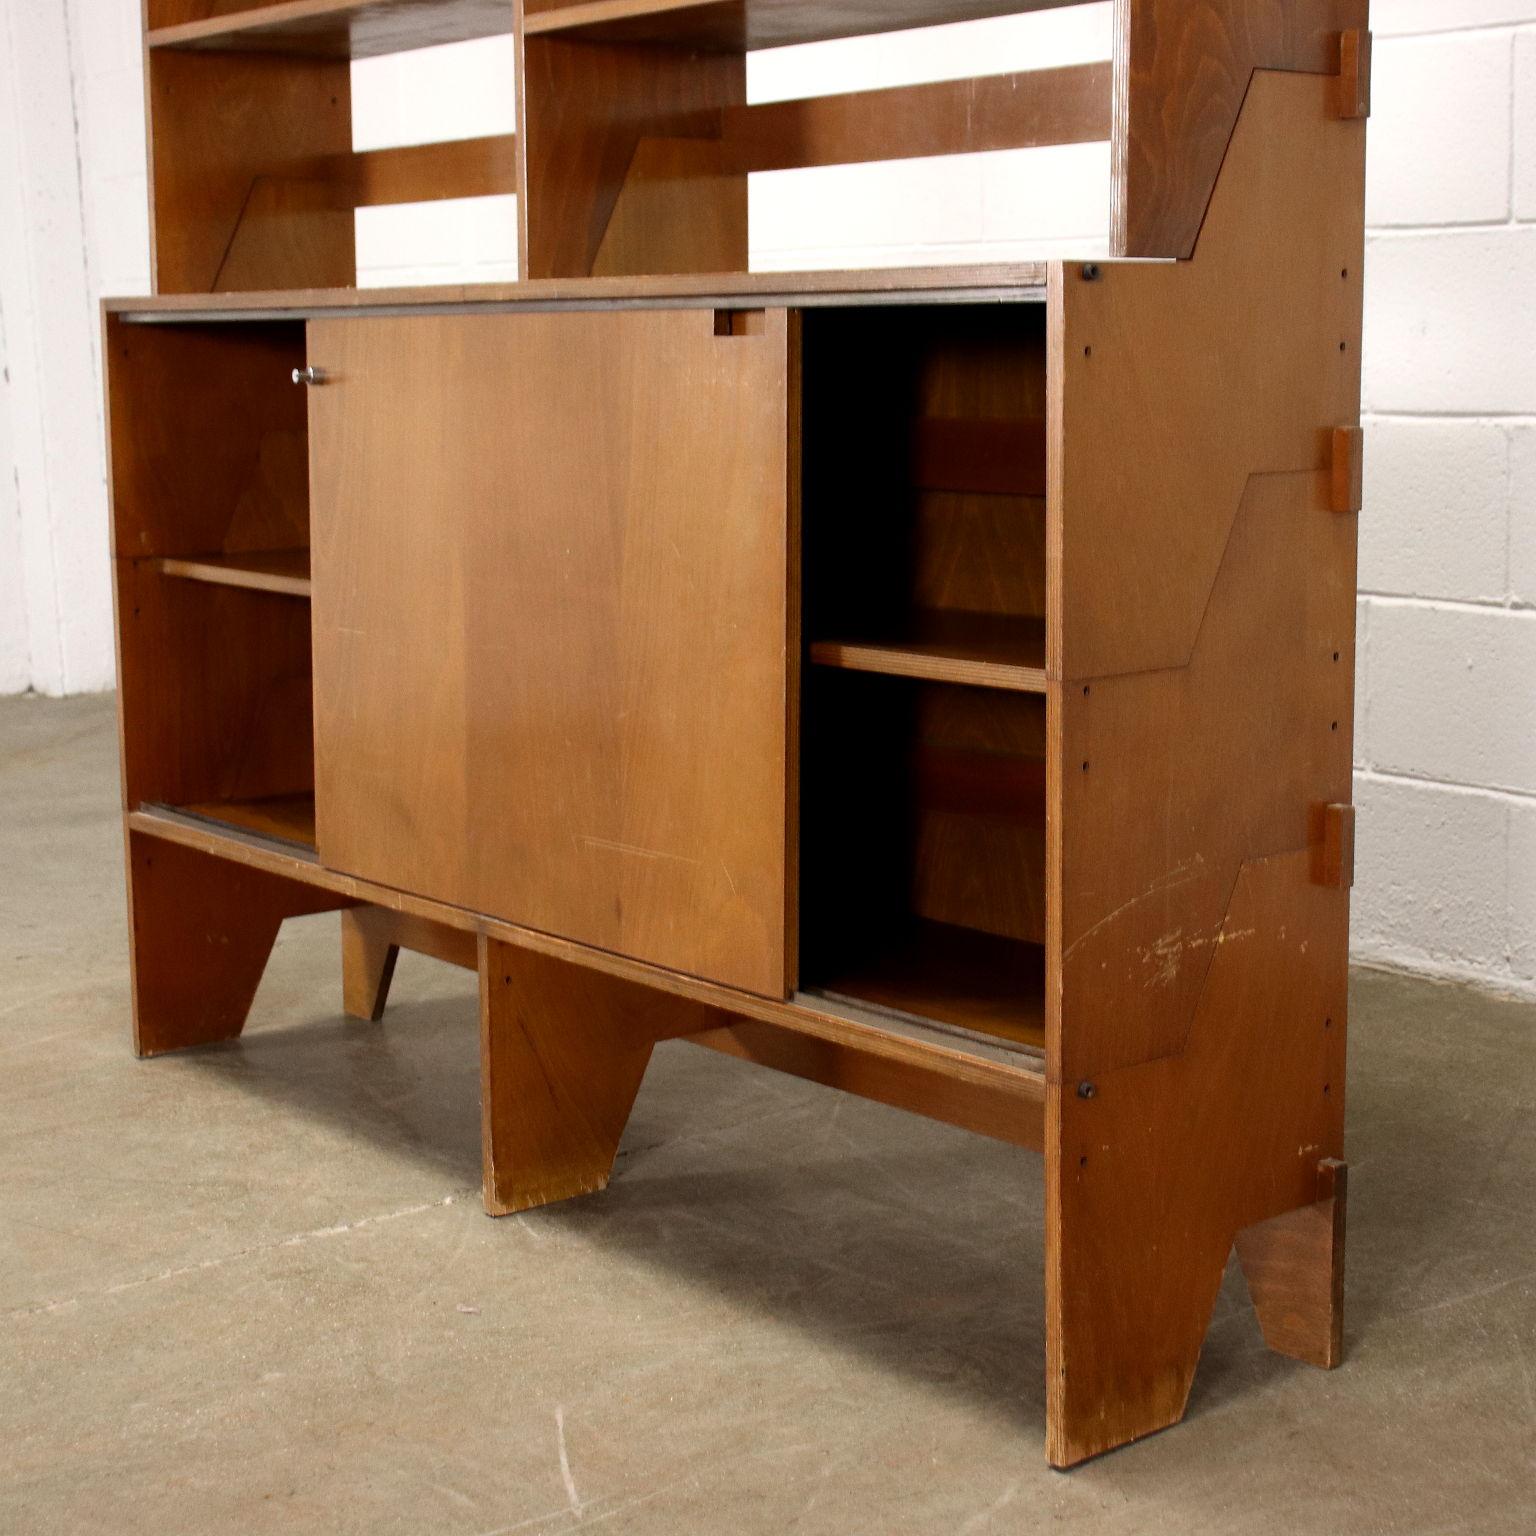 Italian Two-Bay Bookcase F54 by Mcselvini Stained Wood Italy 1960s